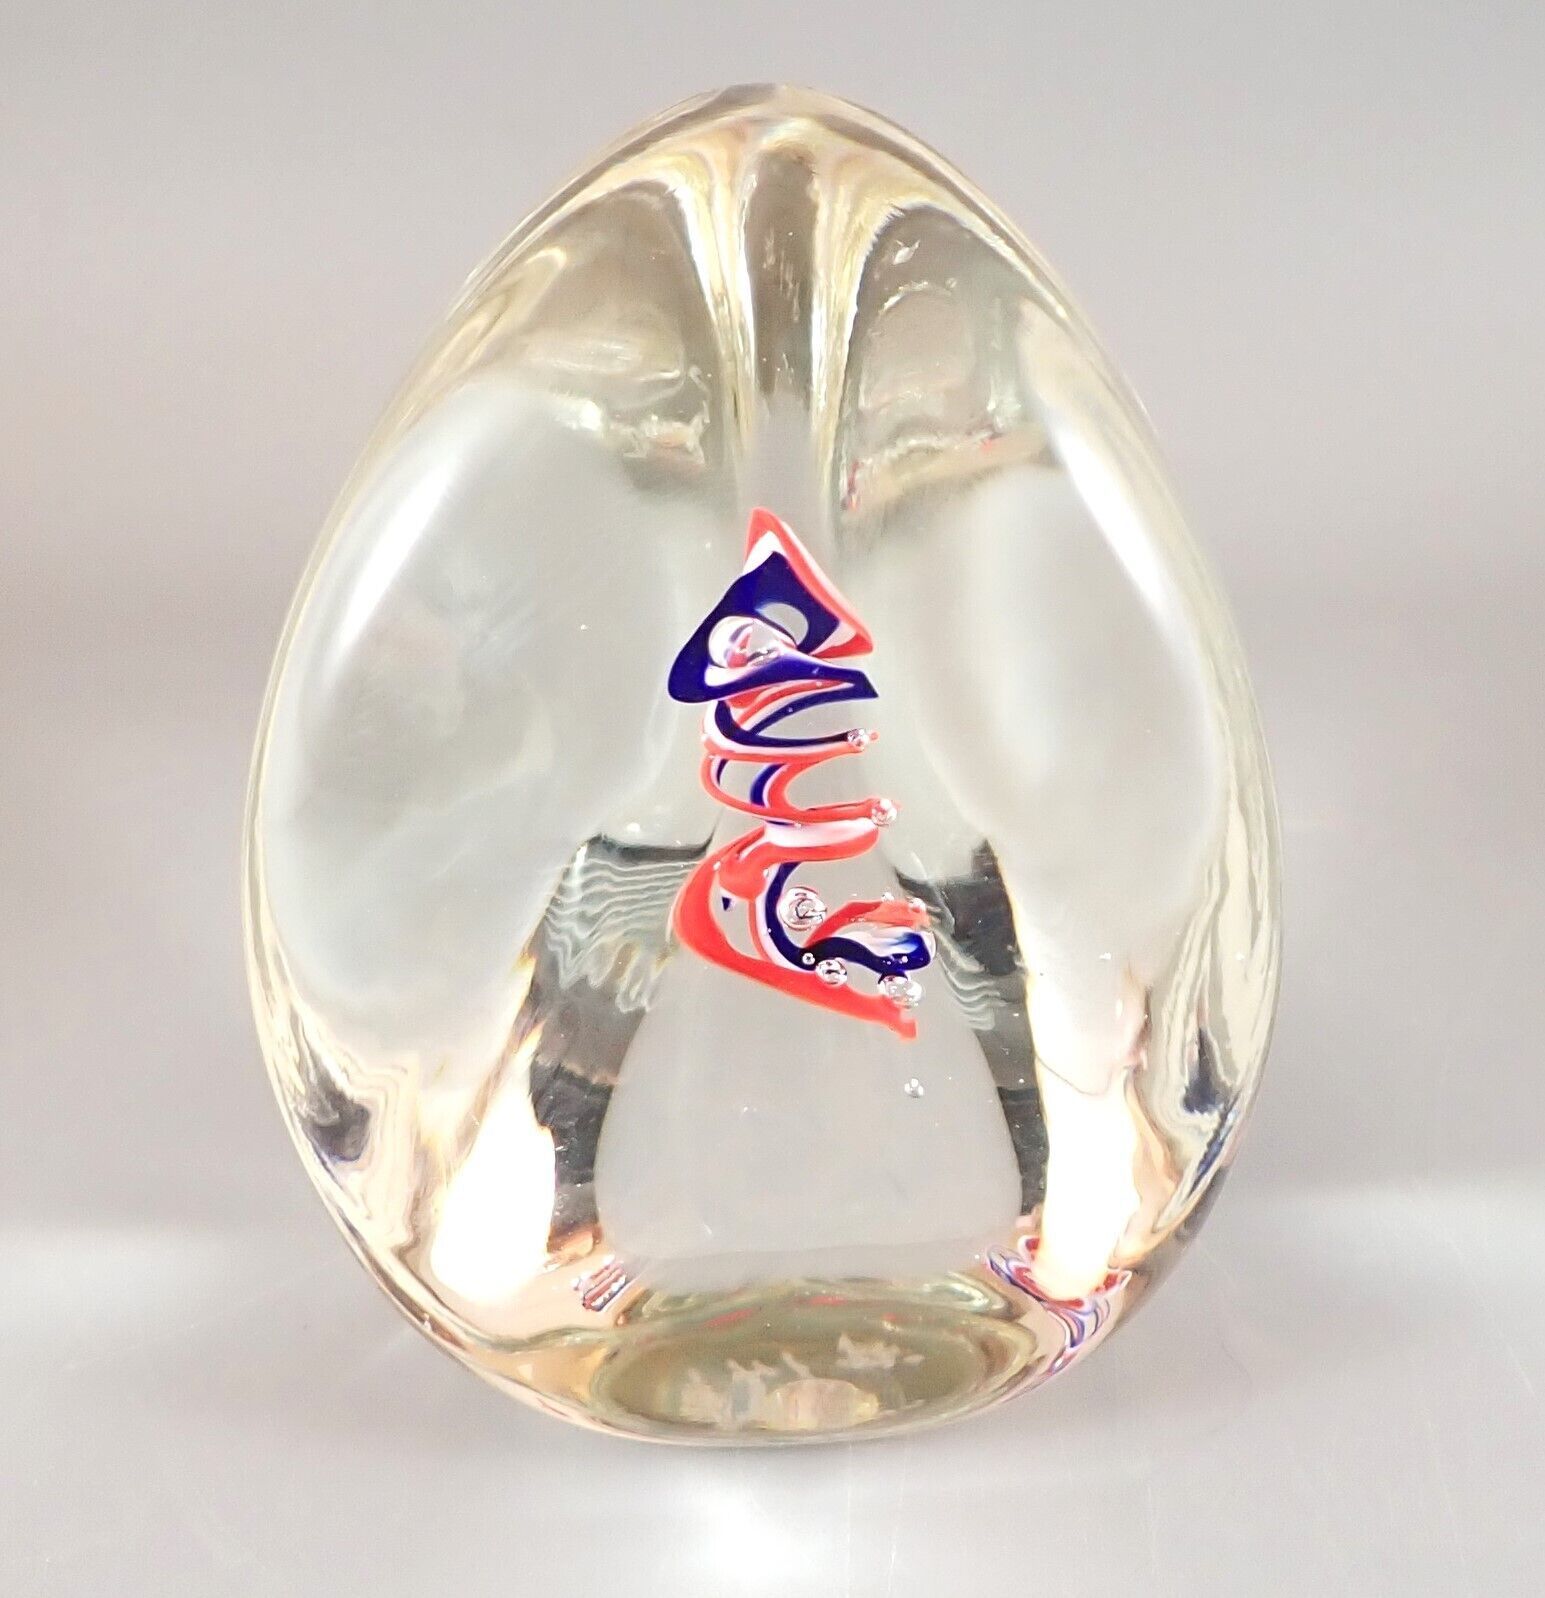 Art Glass Monte Dunlavy Signed Paperweight Red White & Blue Ribbon #146